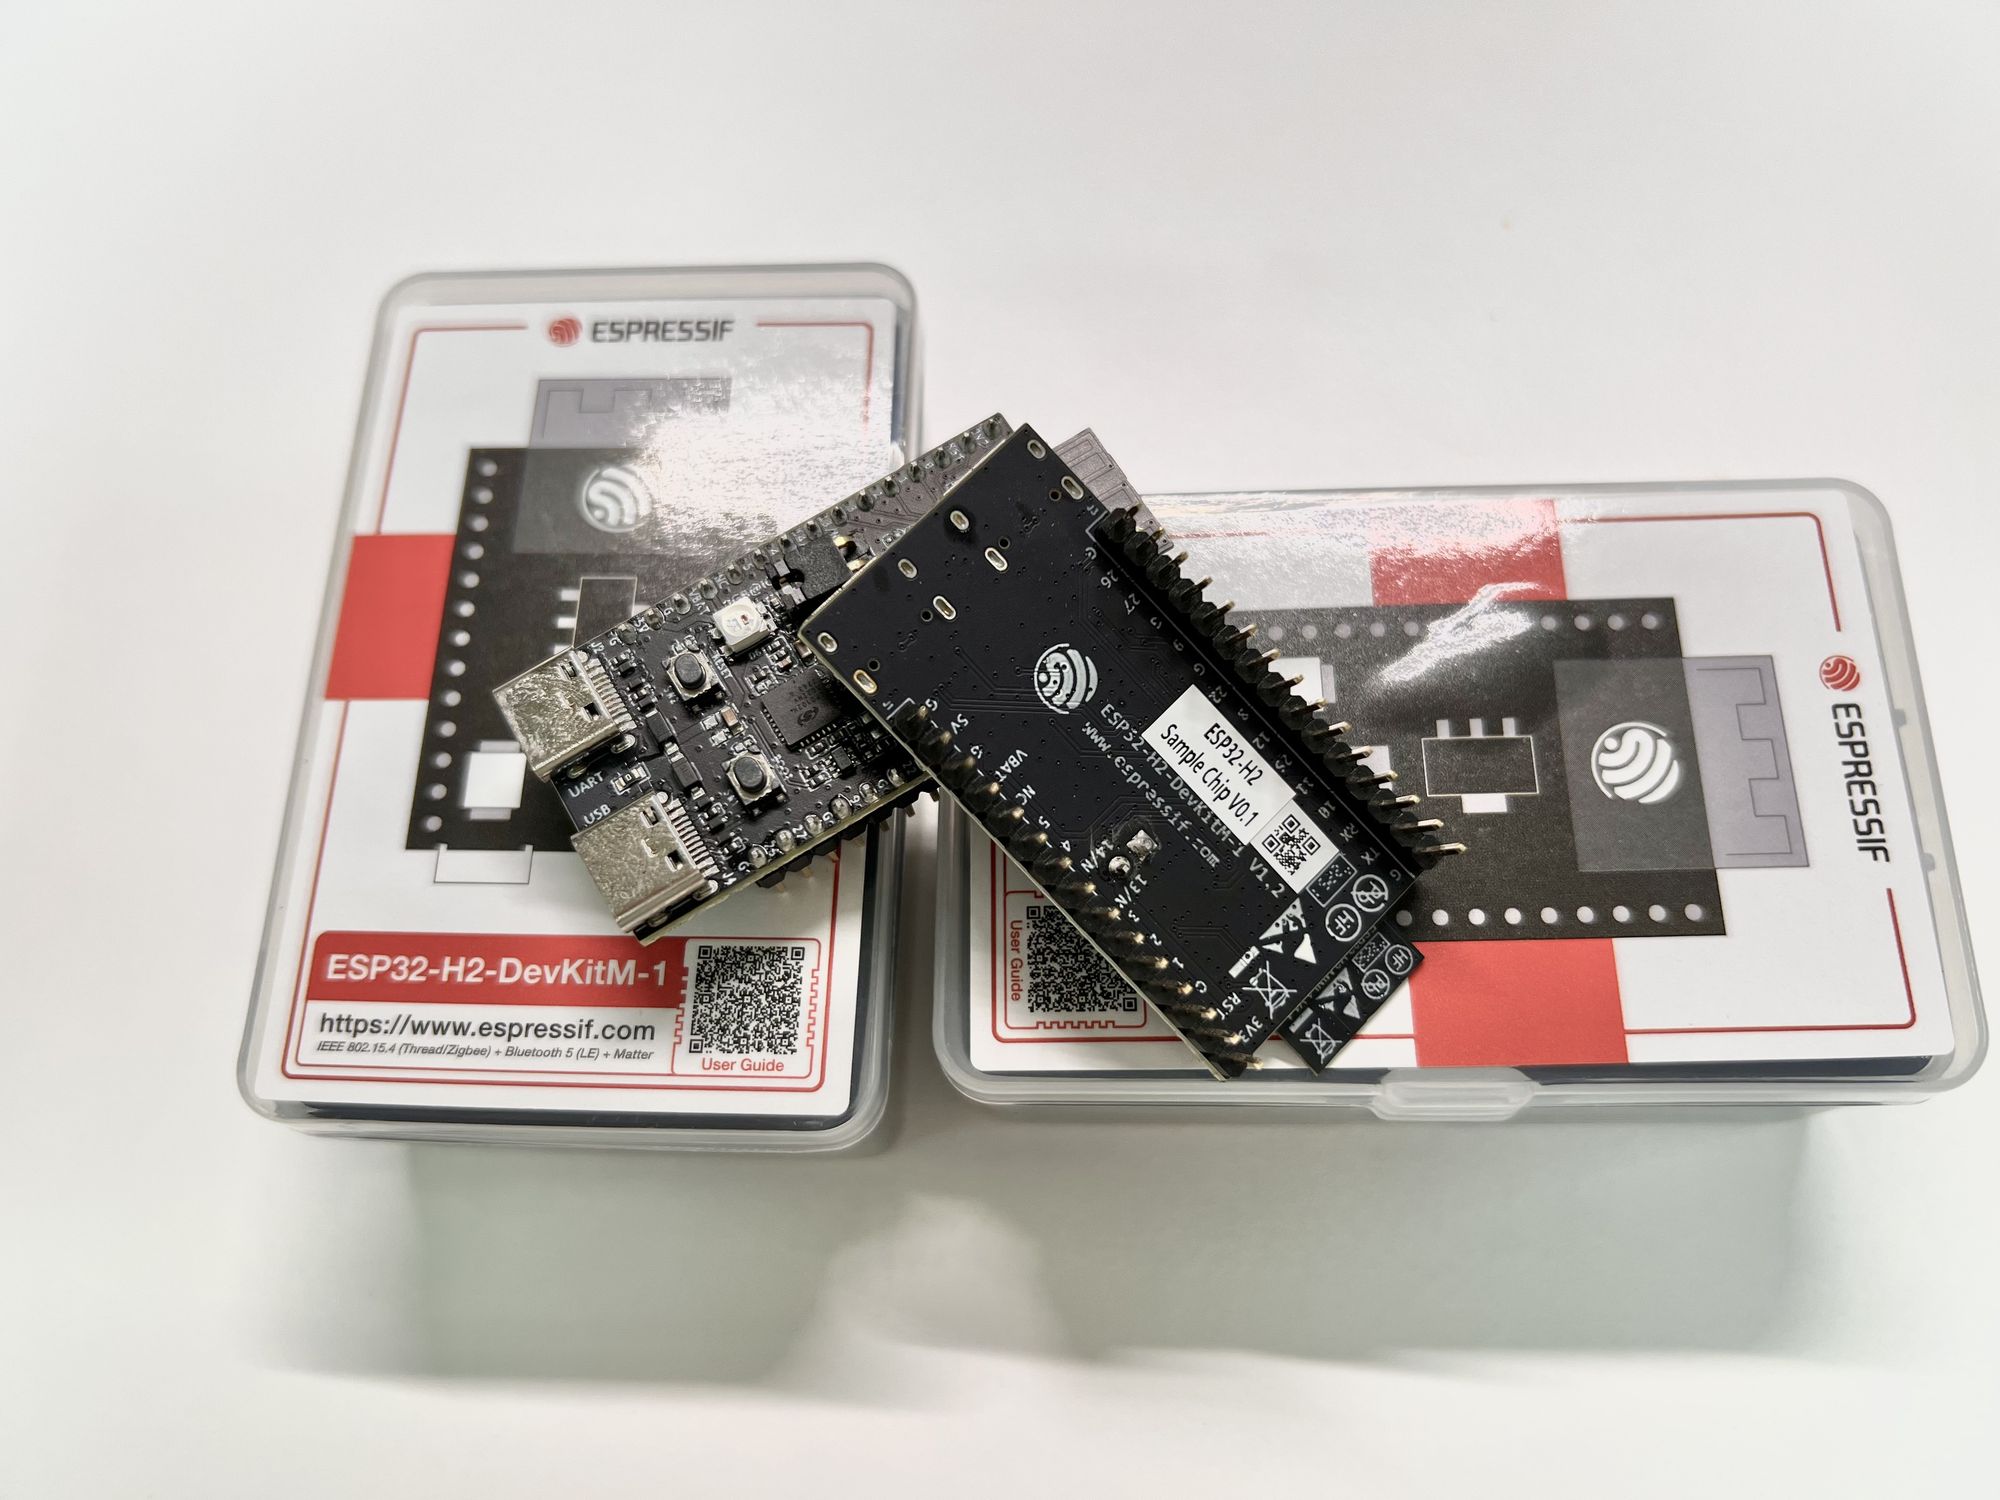 Using zigbee with an ESP32-H2 and an ESP32-C6 to control a LED 